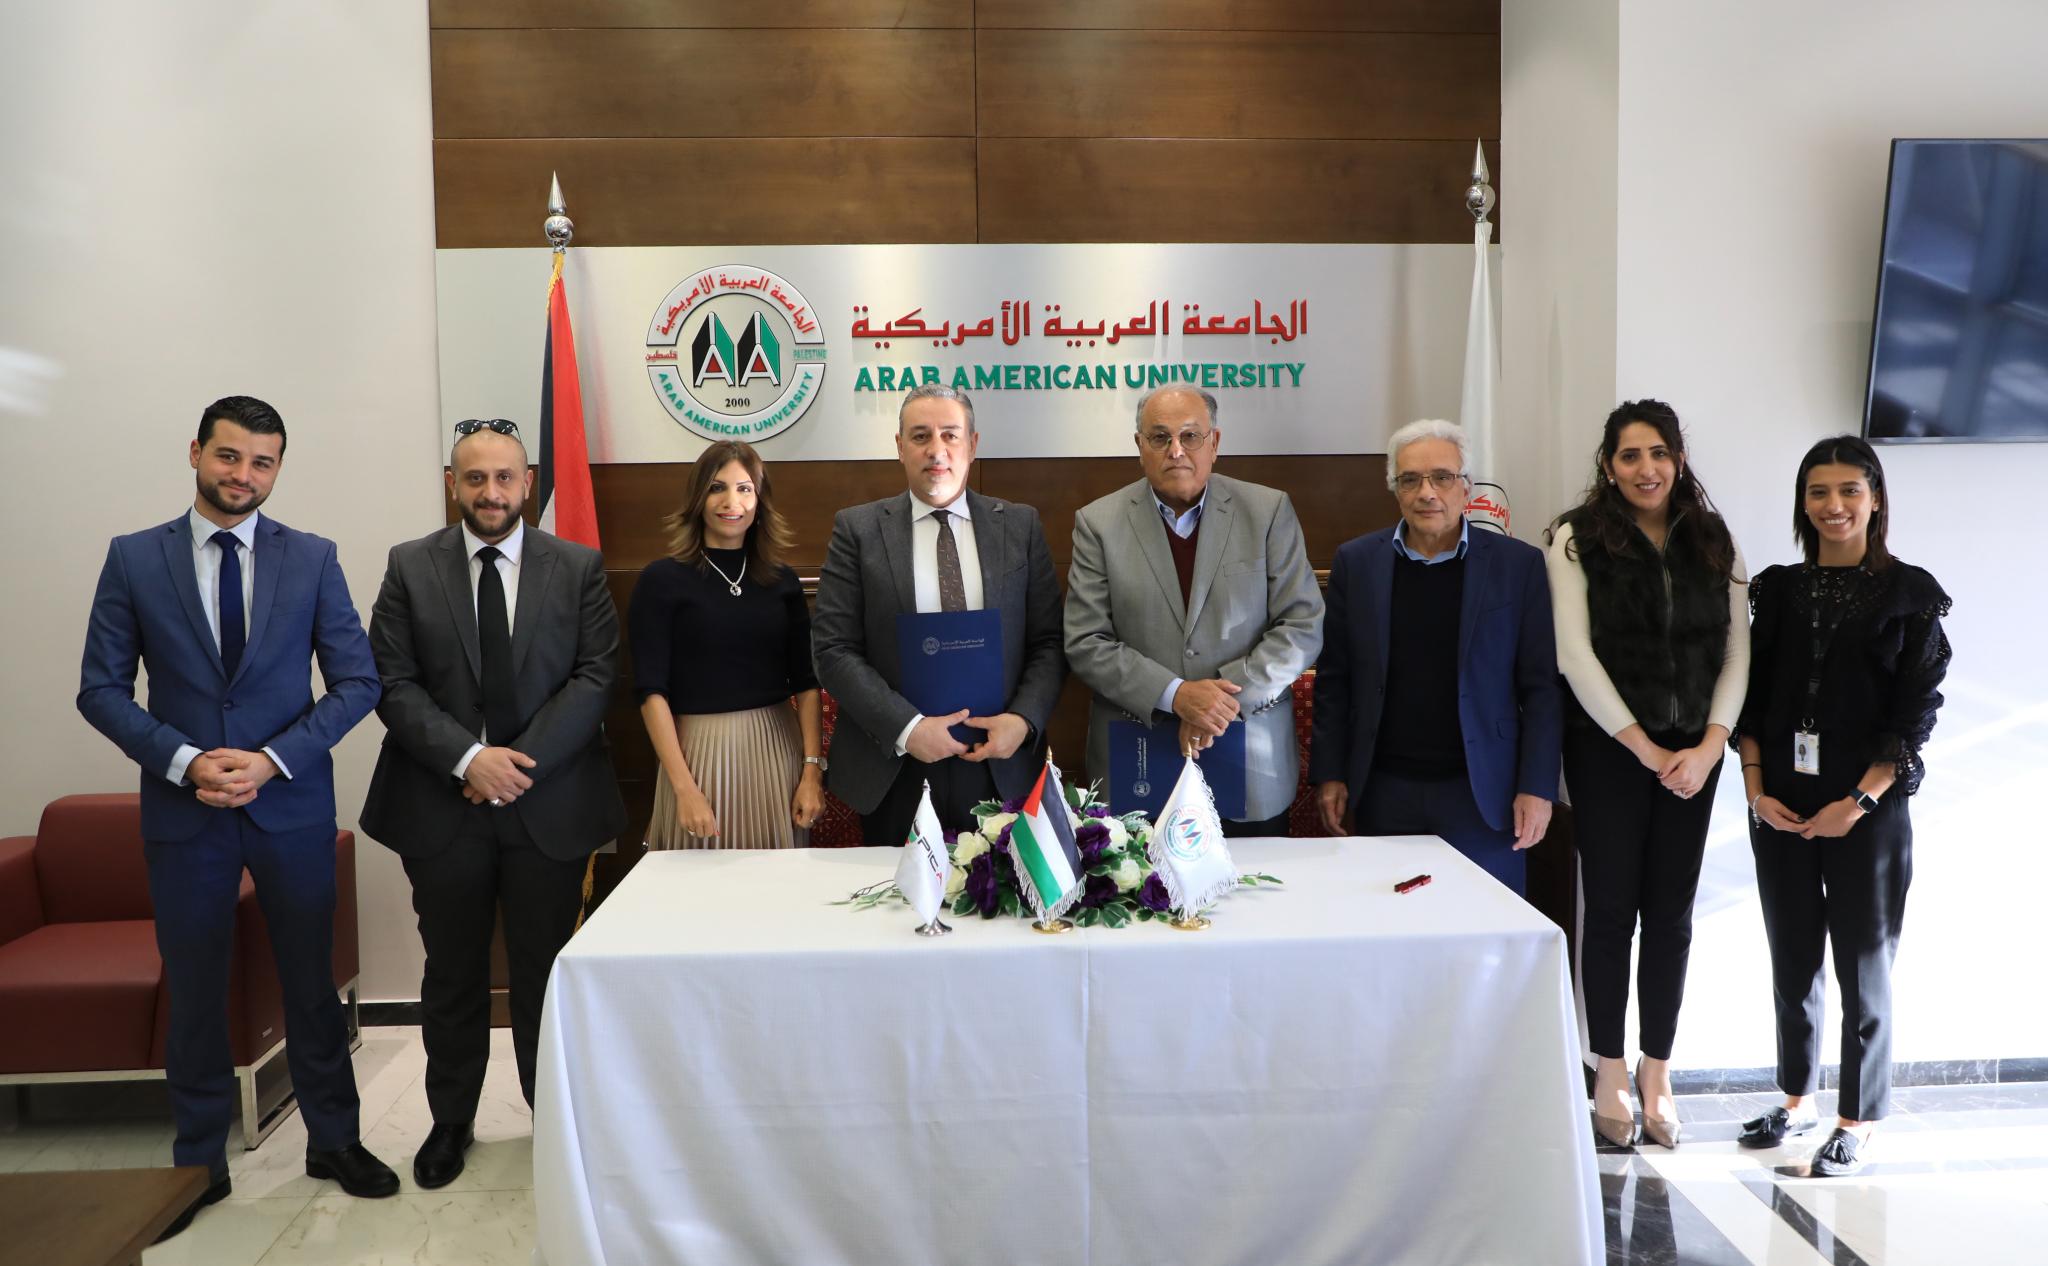 AAUP and the Palestinian International Cooperation Agency (PICA) Sign a Cooperation Agreement for Development and Mobility